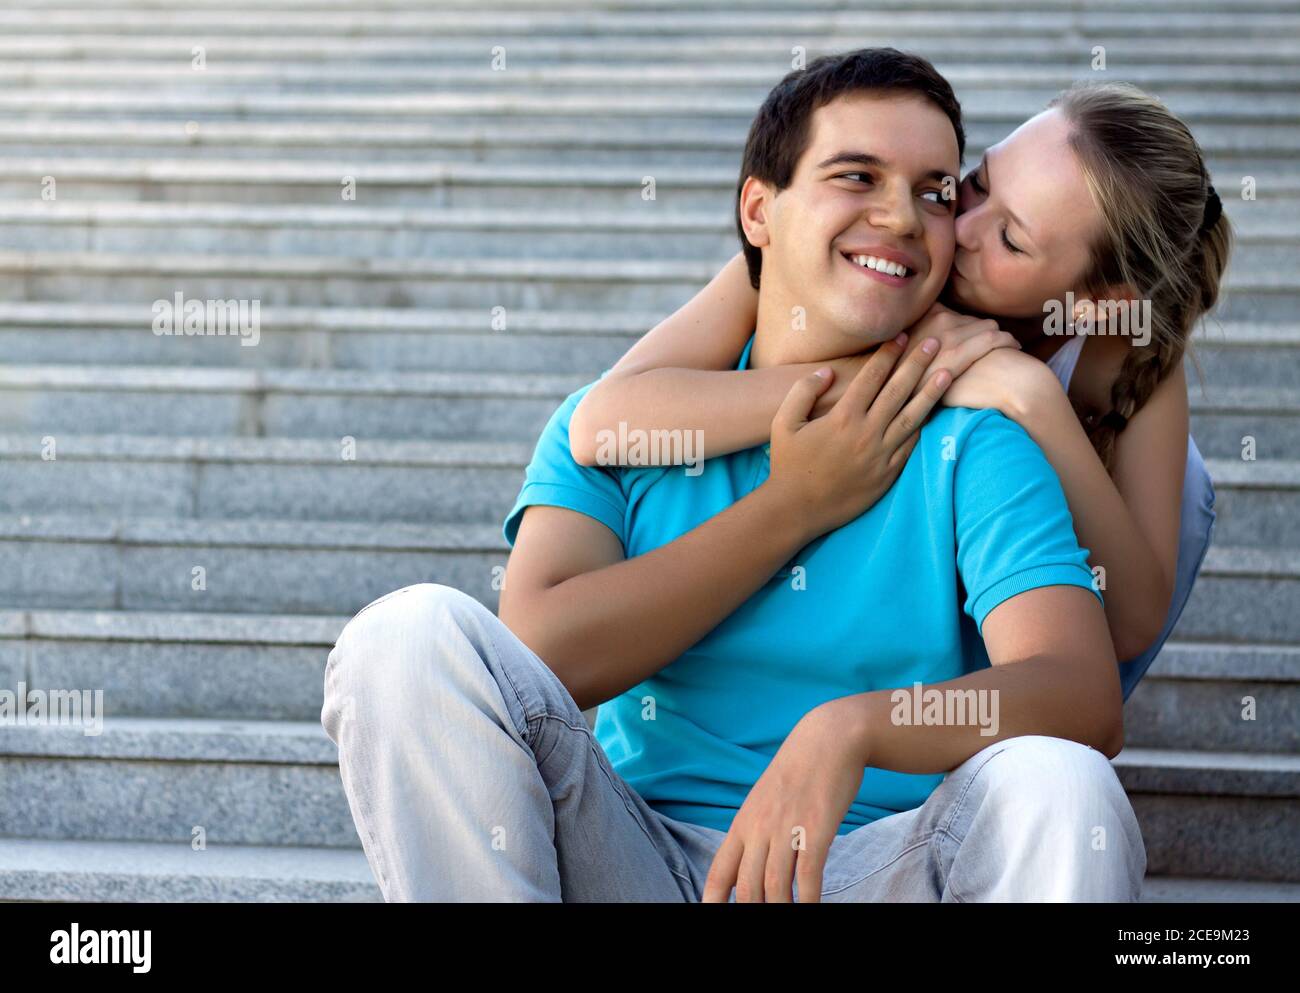 loving couple sitting on stairs and embracing Stock Photo